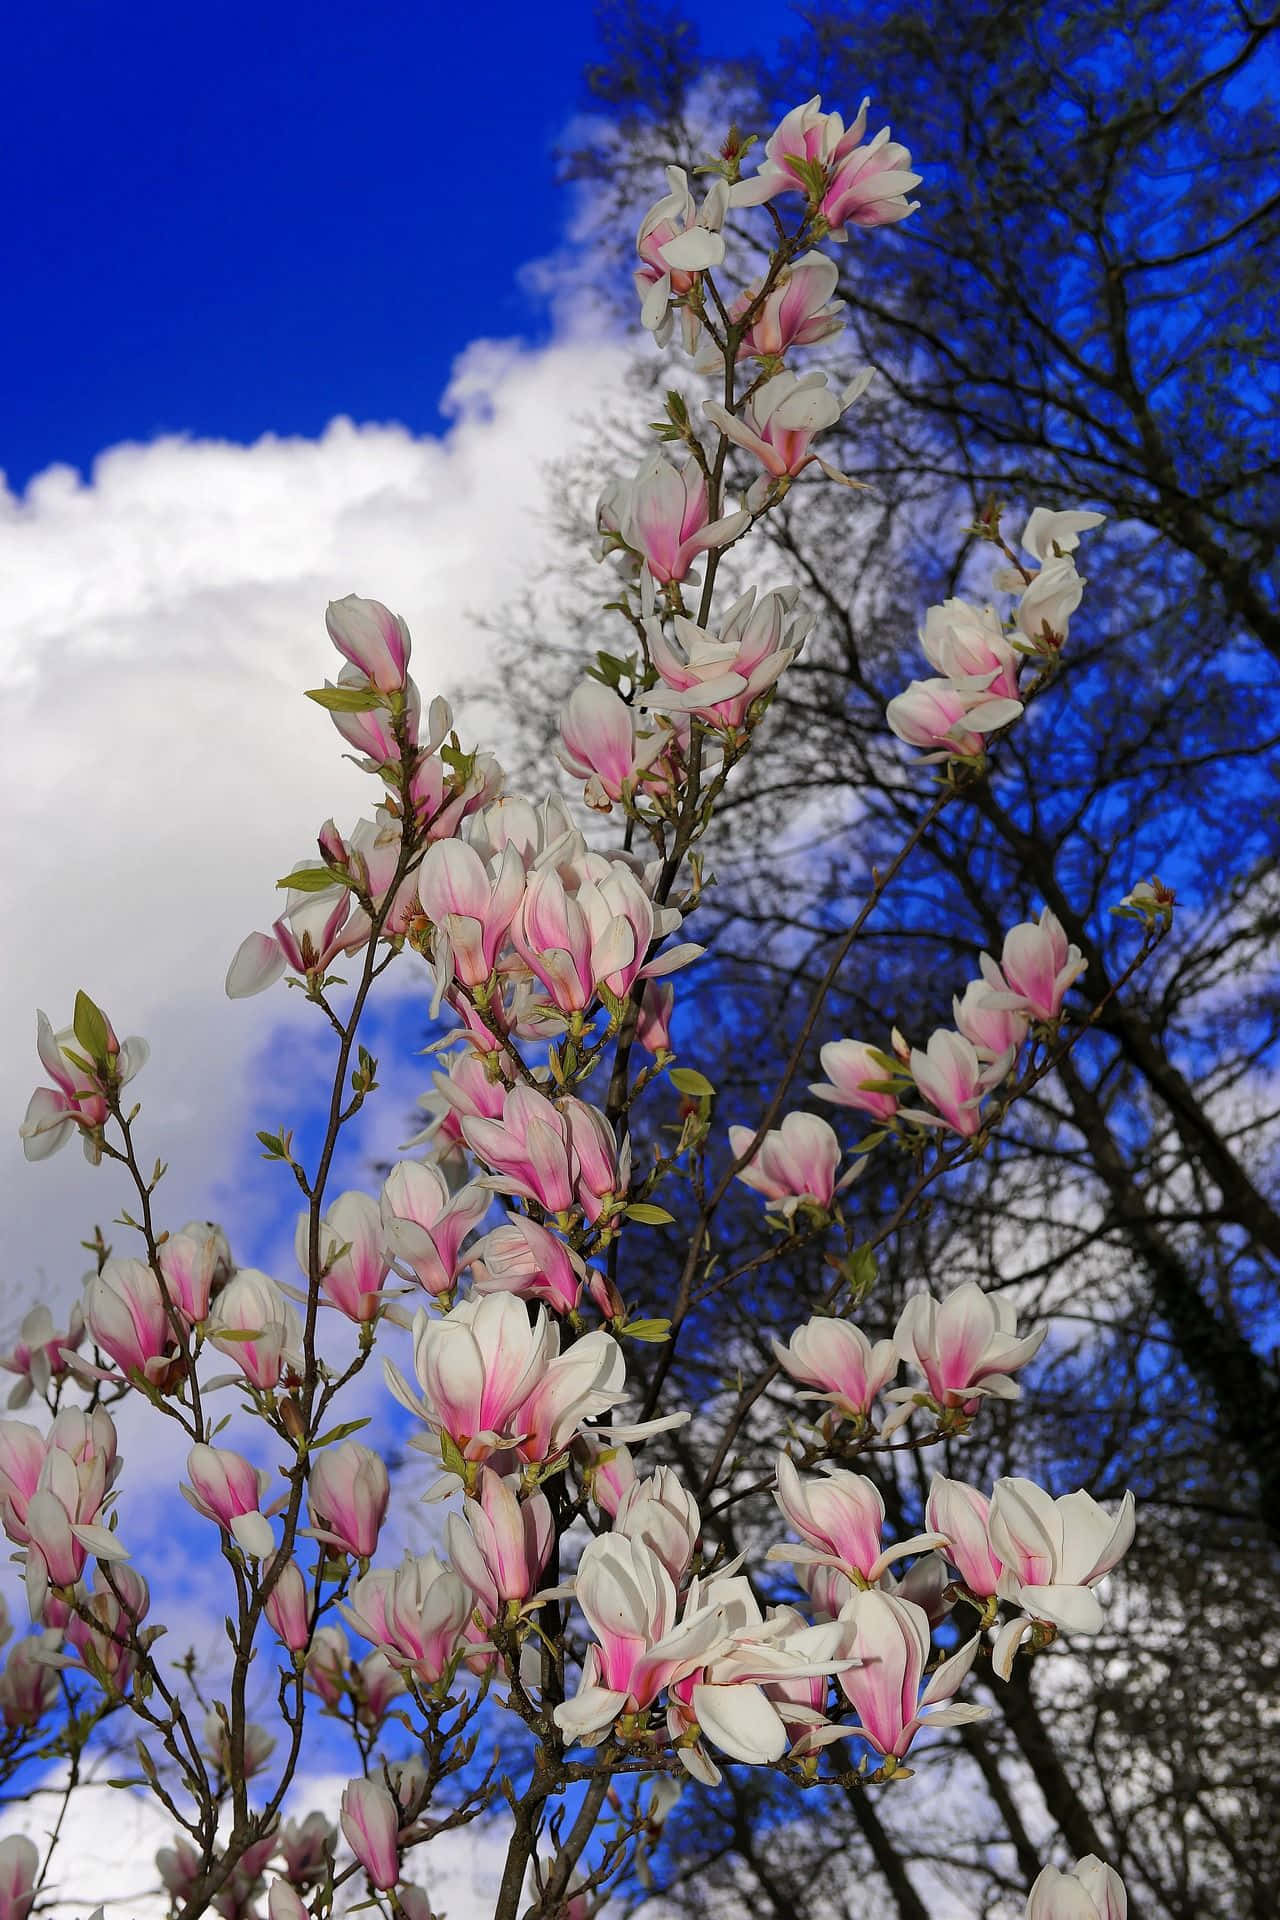 A bright and serene view of a tulip tree in full bloom